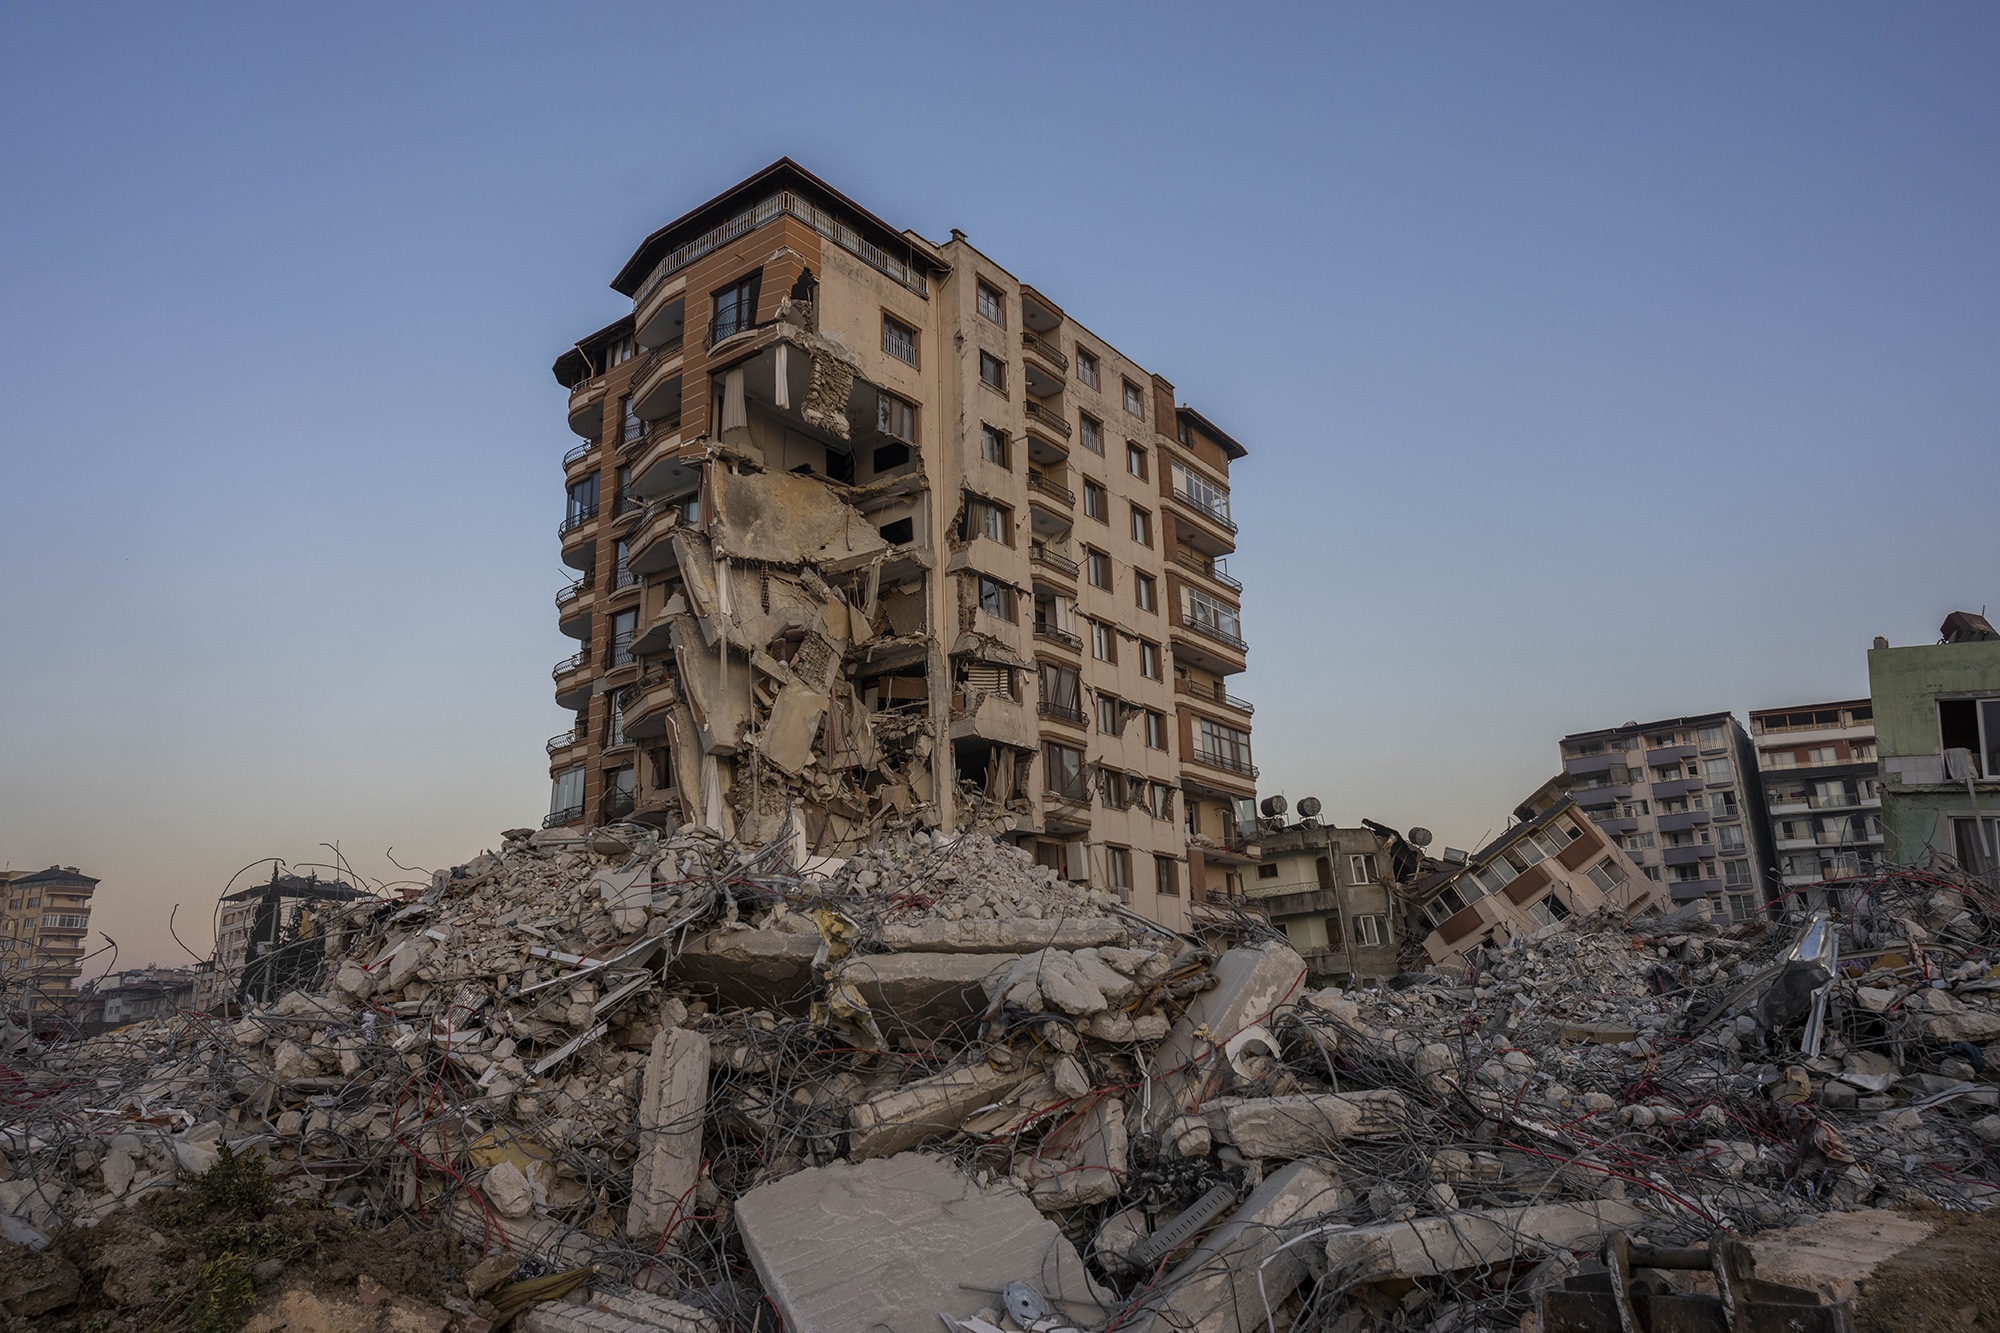 A building standing amid piles of rubble set against a blue sky. The building is partially collapsed.